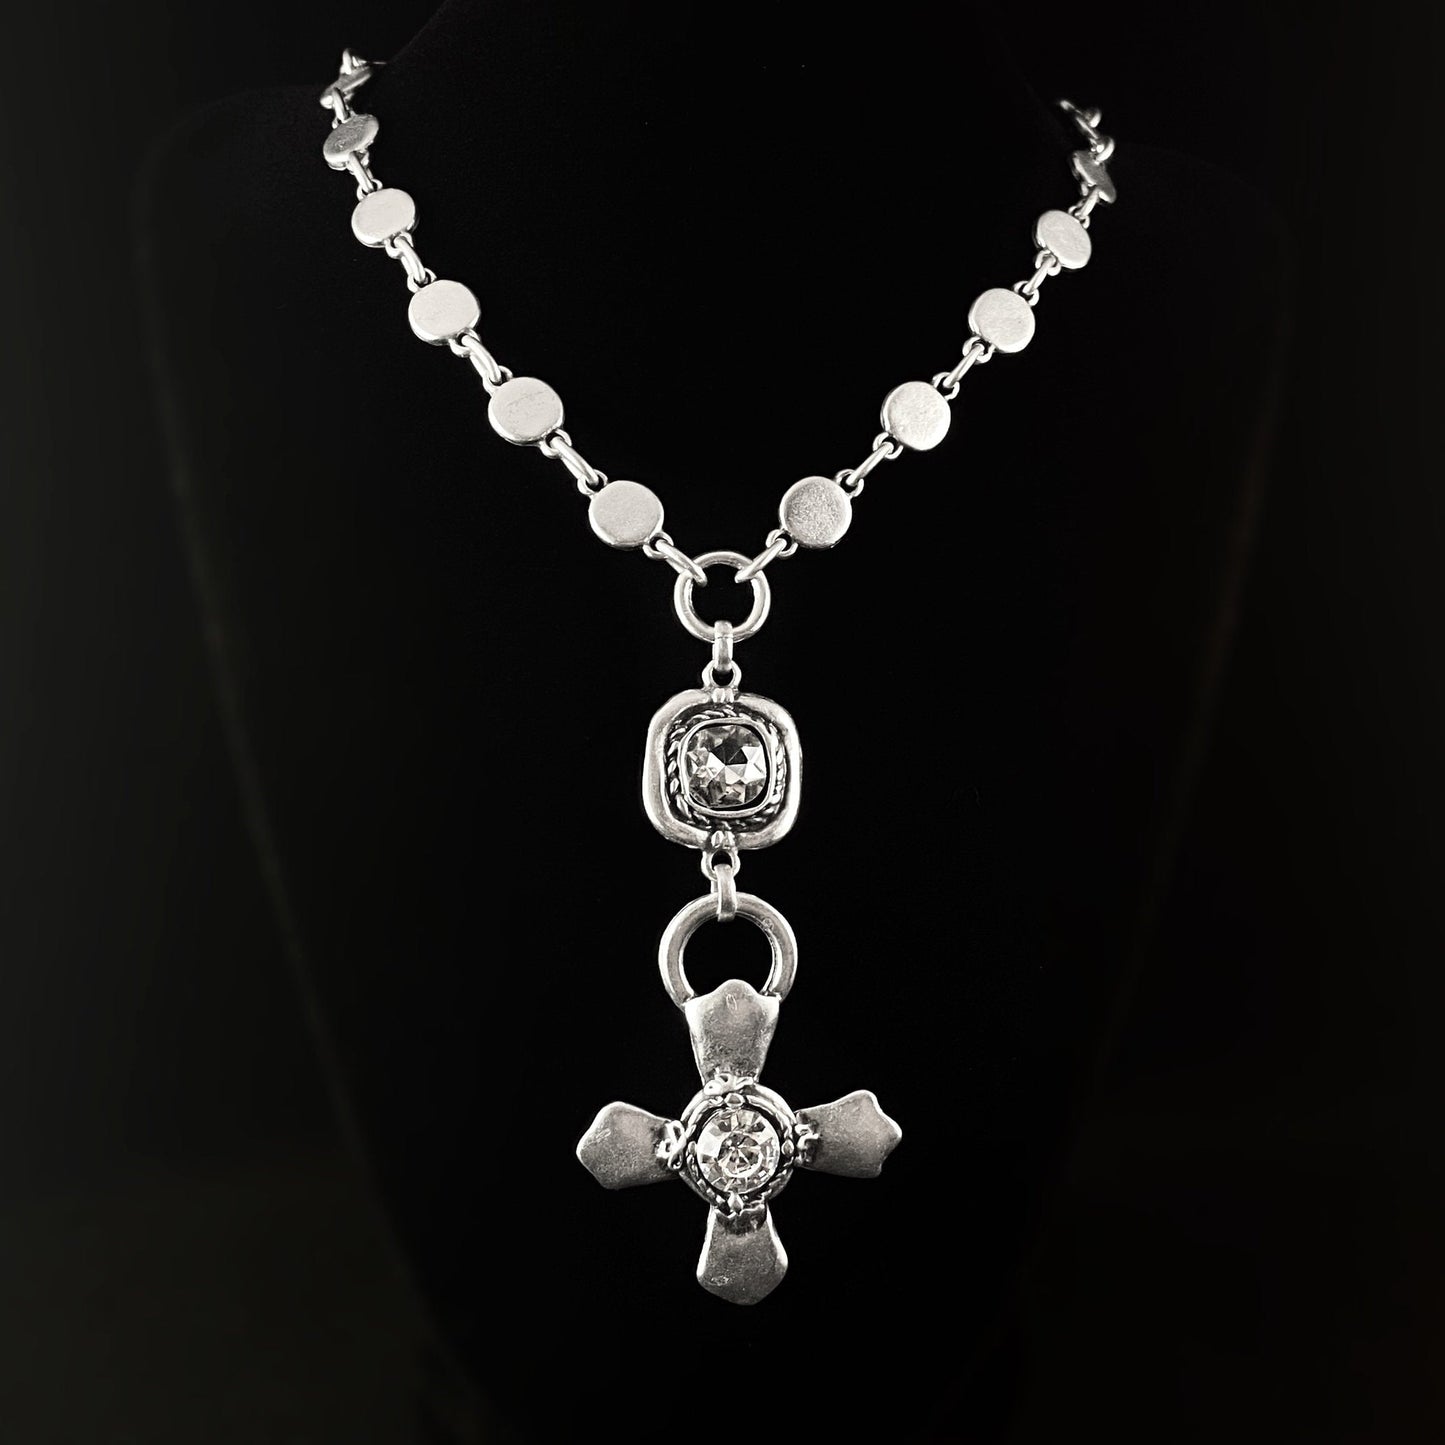 Very Long Silver Necklace with Clear Crystal and Cross Pendant Handmade, Nickel Free - Noir